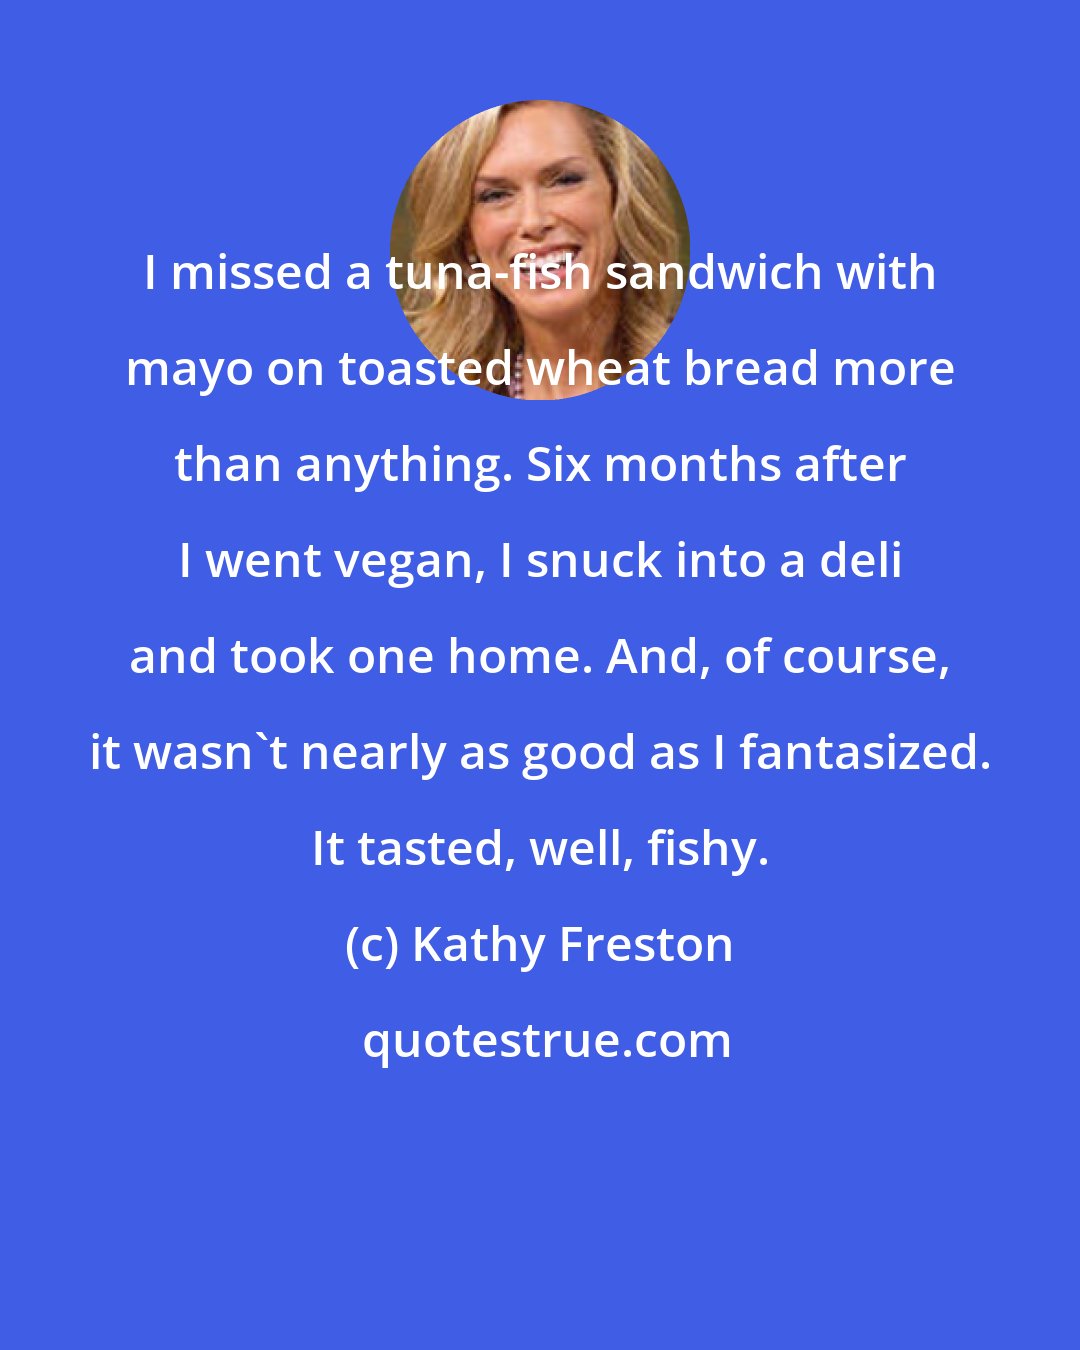 Kathy Freston: I missed a tuna-fish sandwich with mayo on toasted wheat bread more than anything. Six months after I went vegan, I snuck into a deli and took one home. And, of course, it wasn't nearly as good as I fantasized. It tasted, well, fishy.